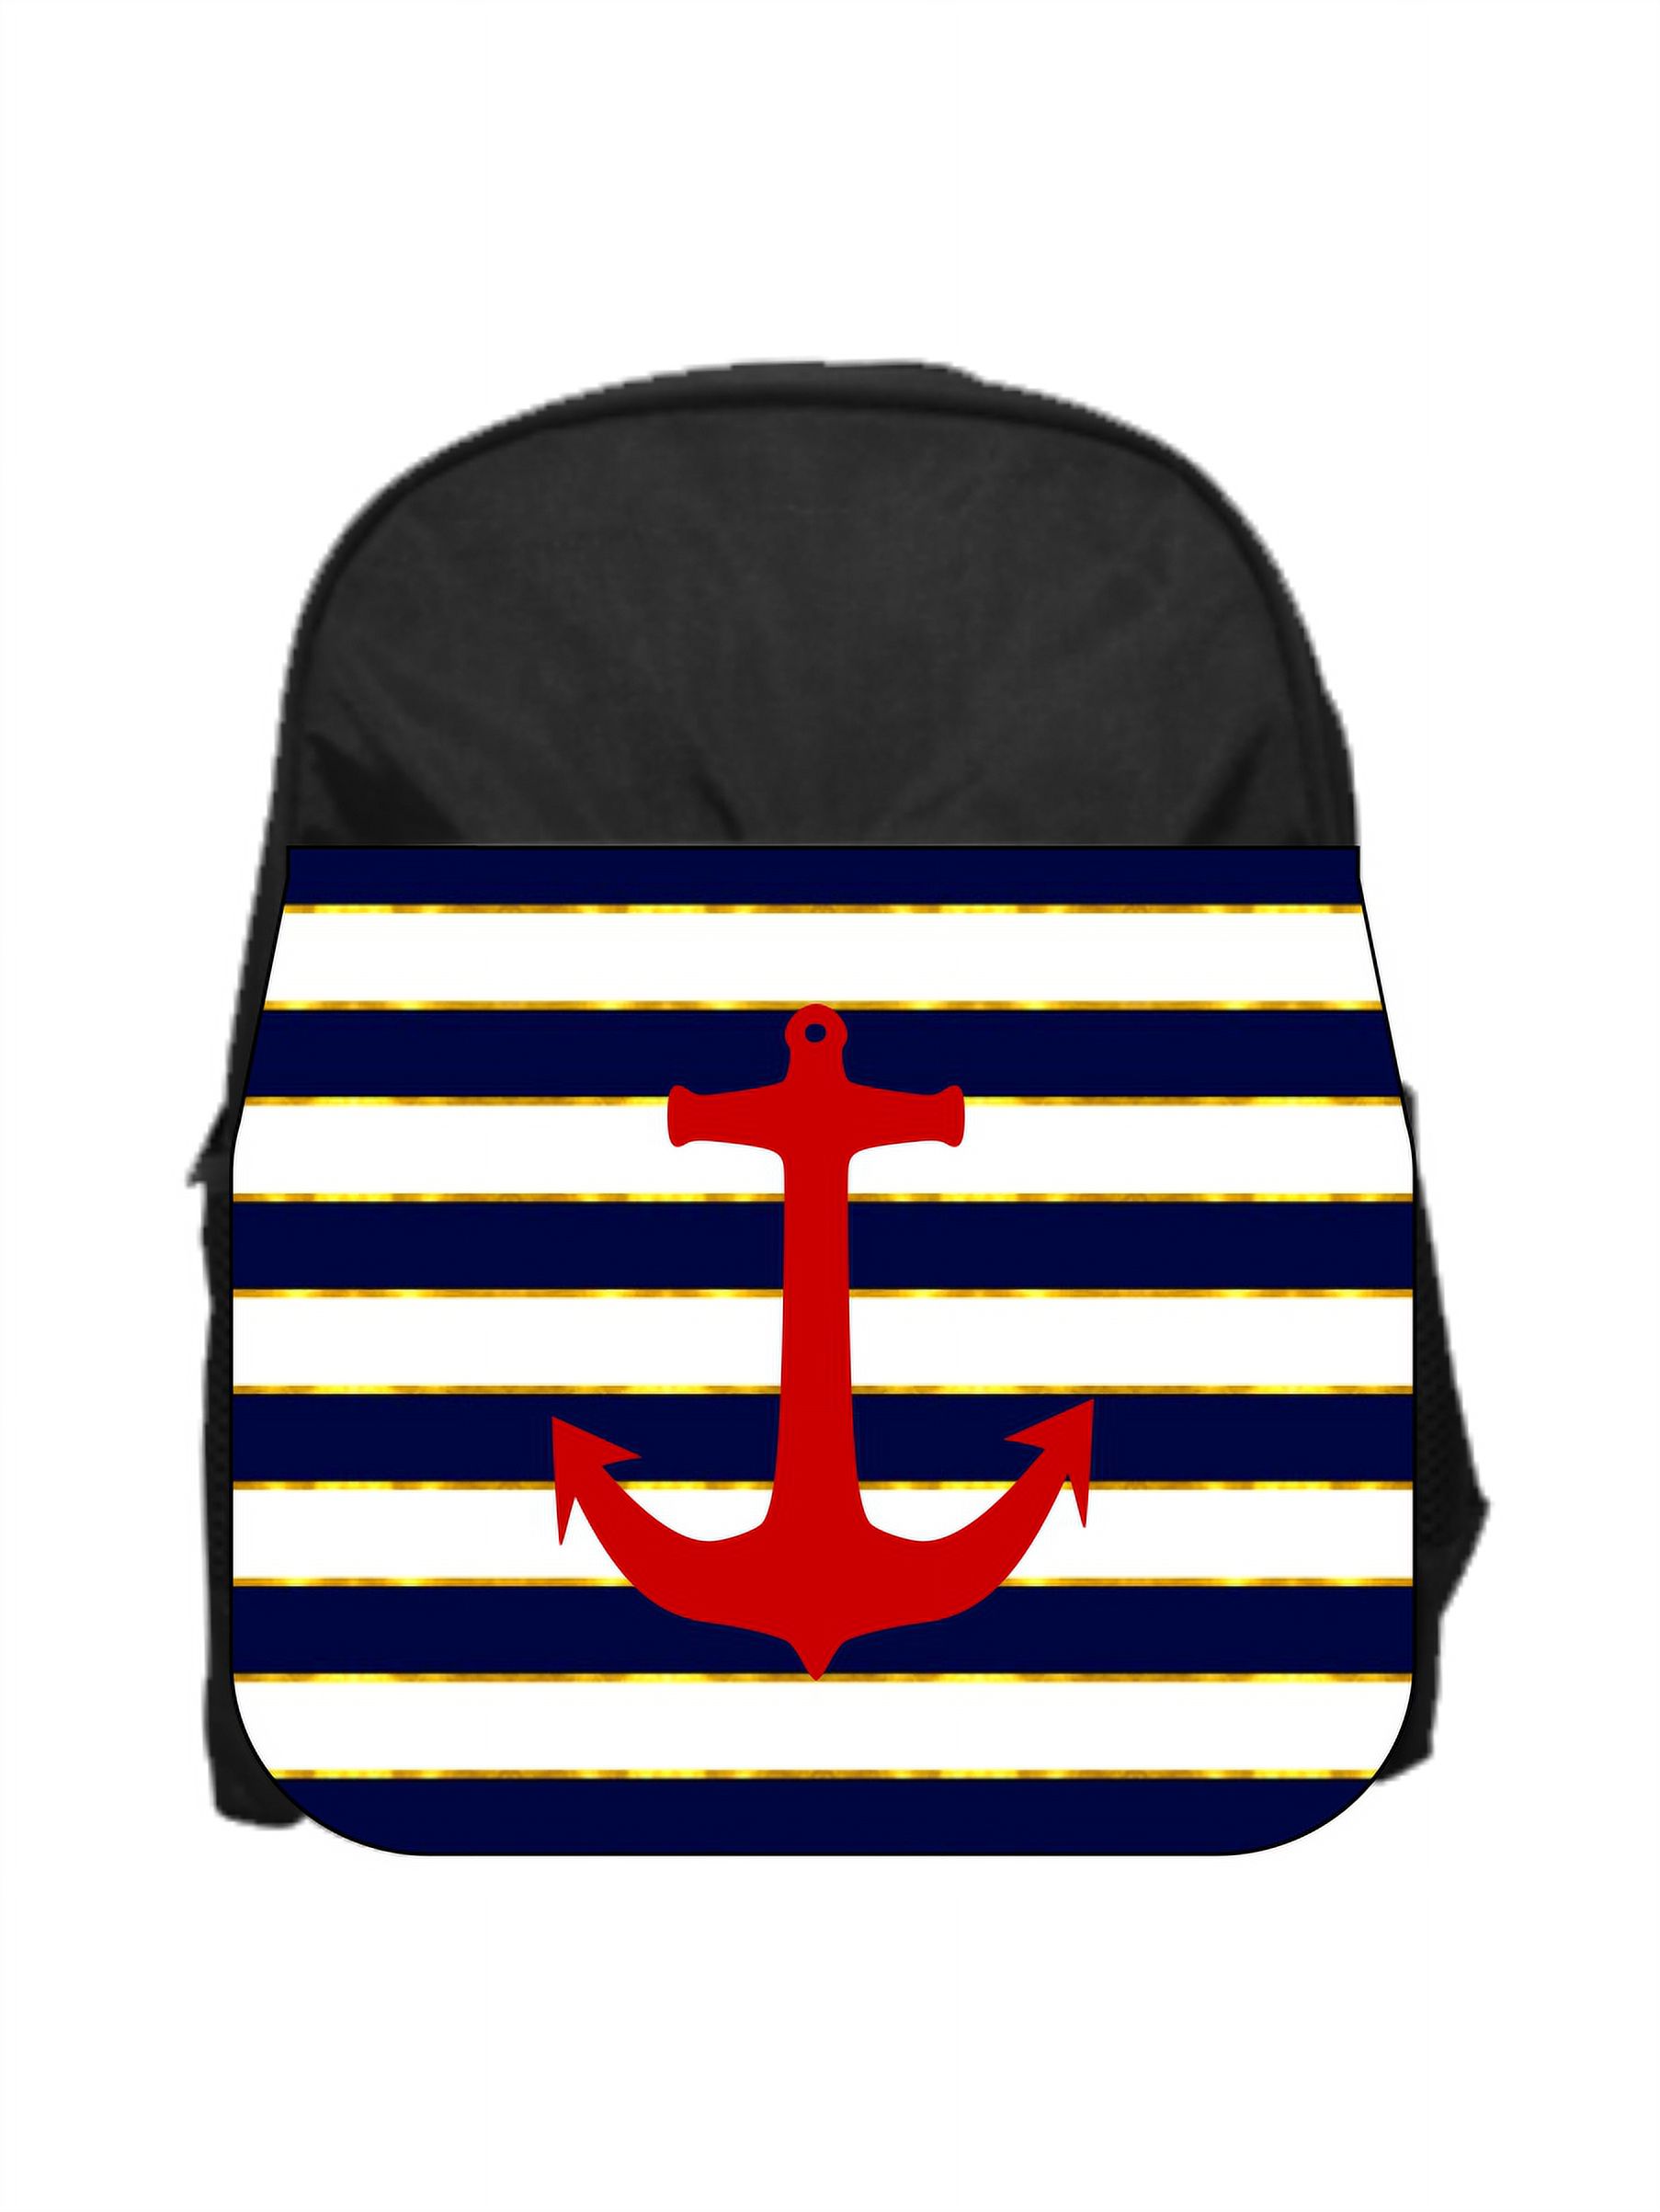 Nautical Red Anchor on Gilded Navy Stripes - 13" x 10" Black Preschool Toddler Children's Backpack - image 1 of 2